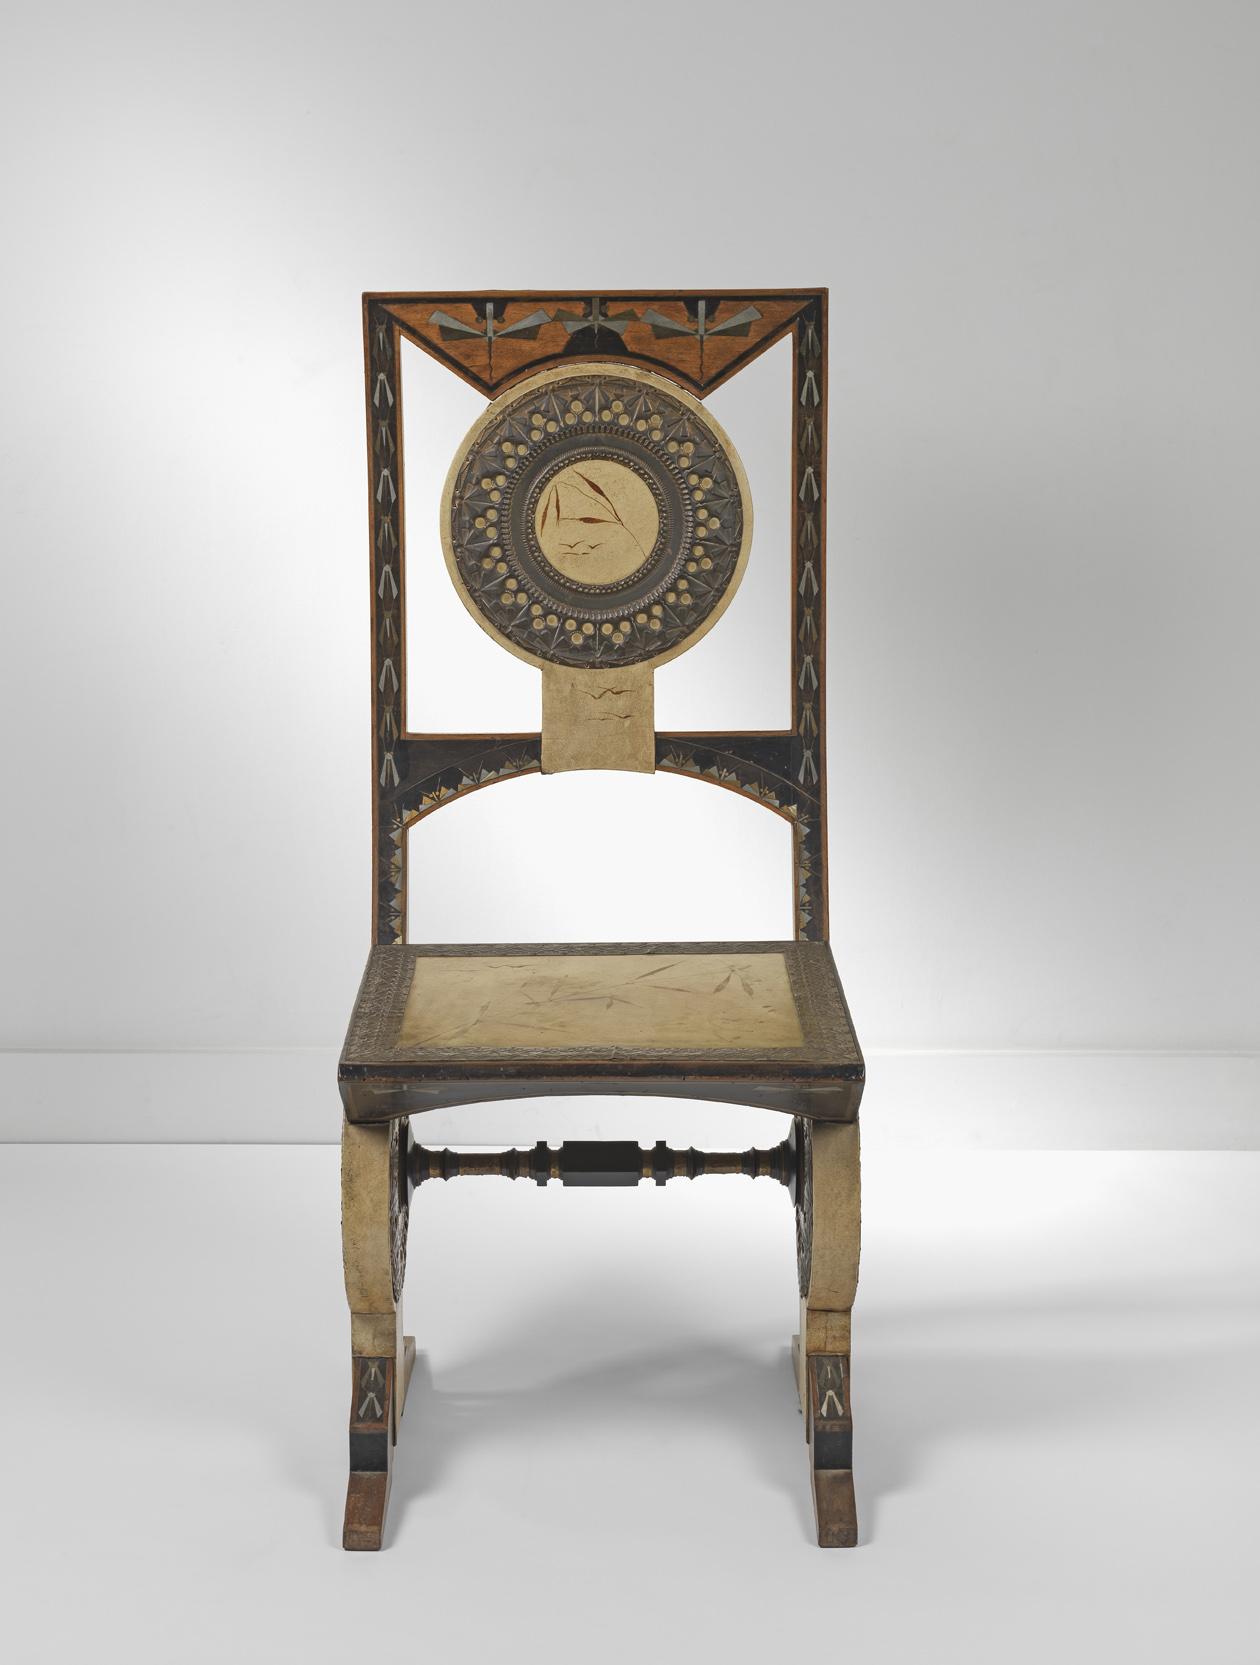 Pair of Chairs, c. 1890